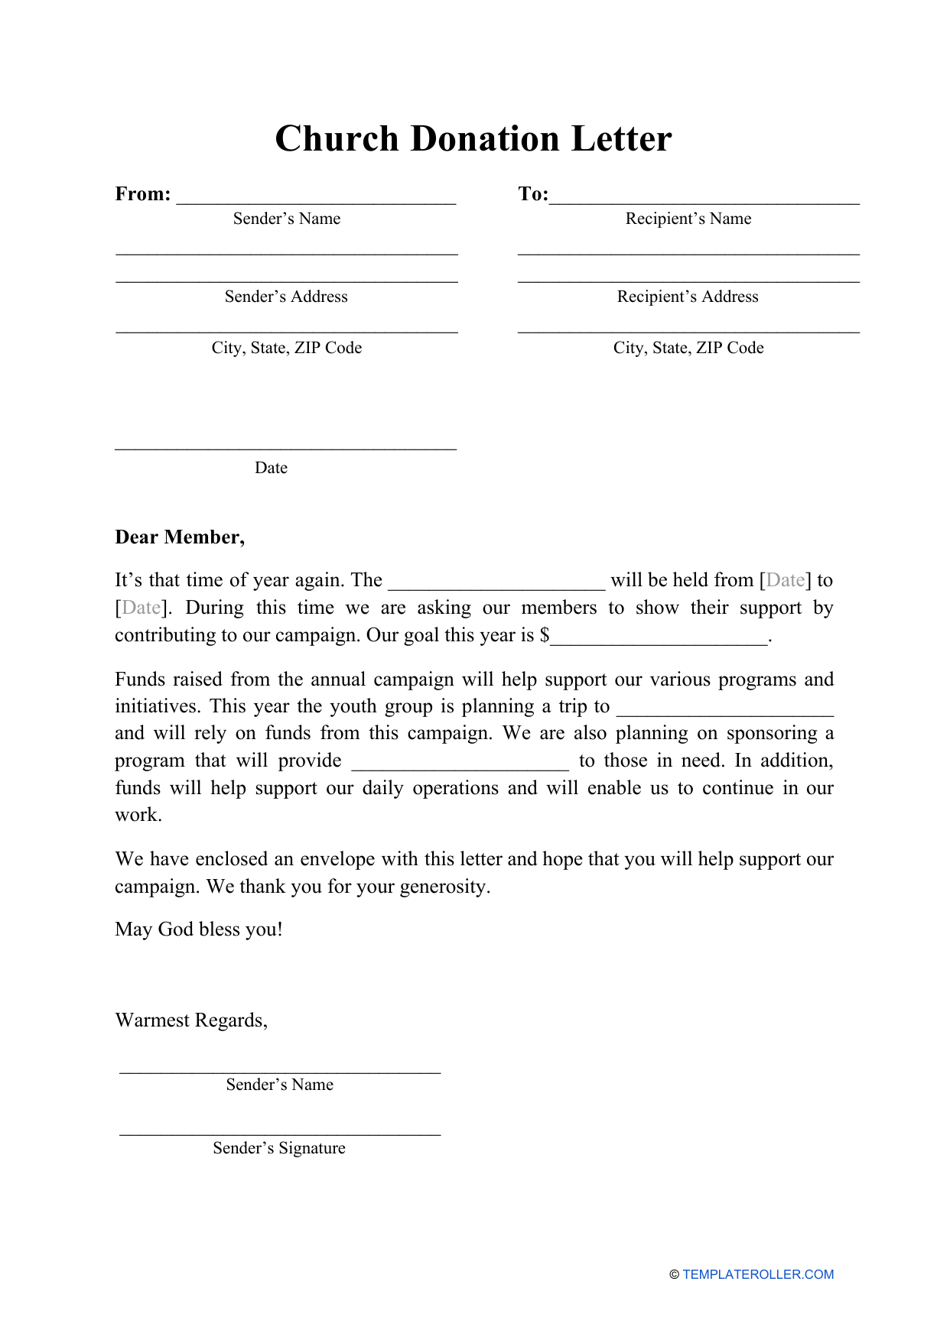 church-donation-letter-template-download-printable-pdf-templateroller